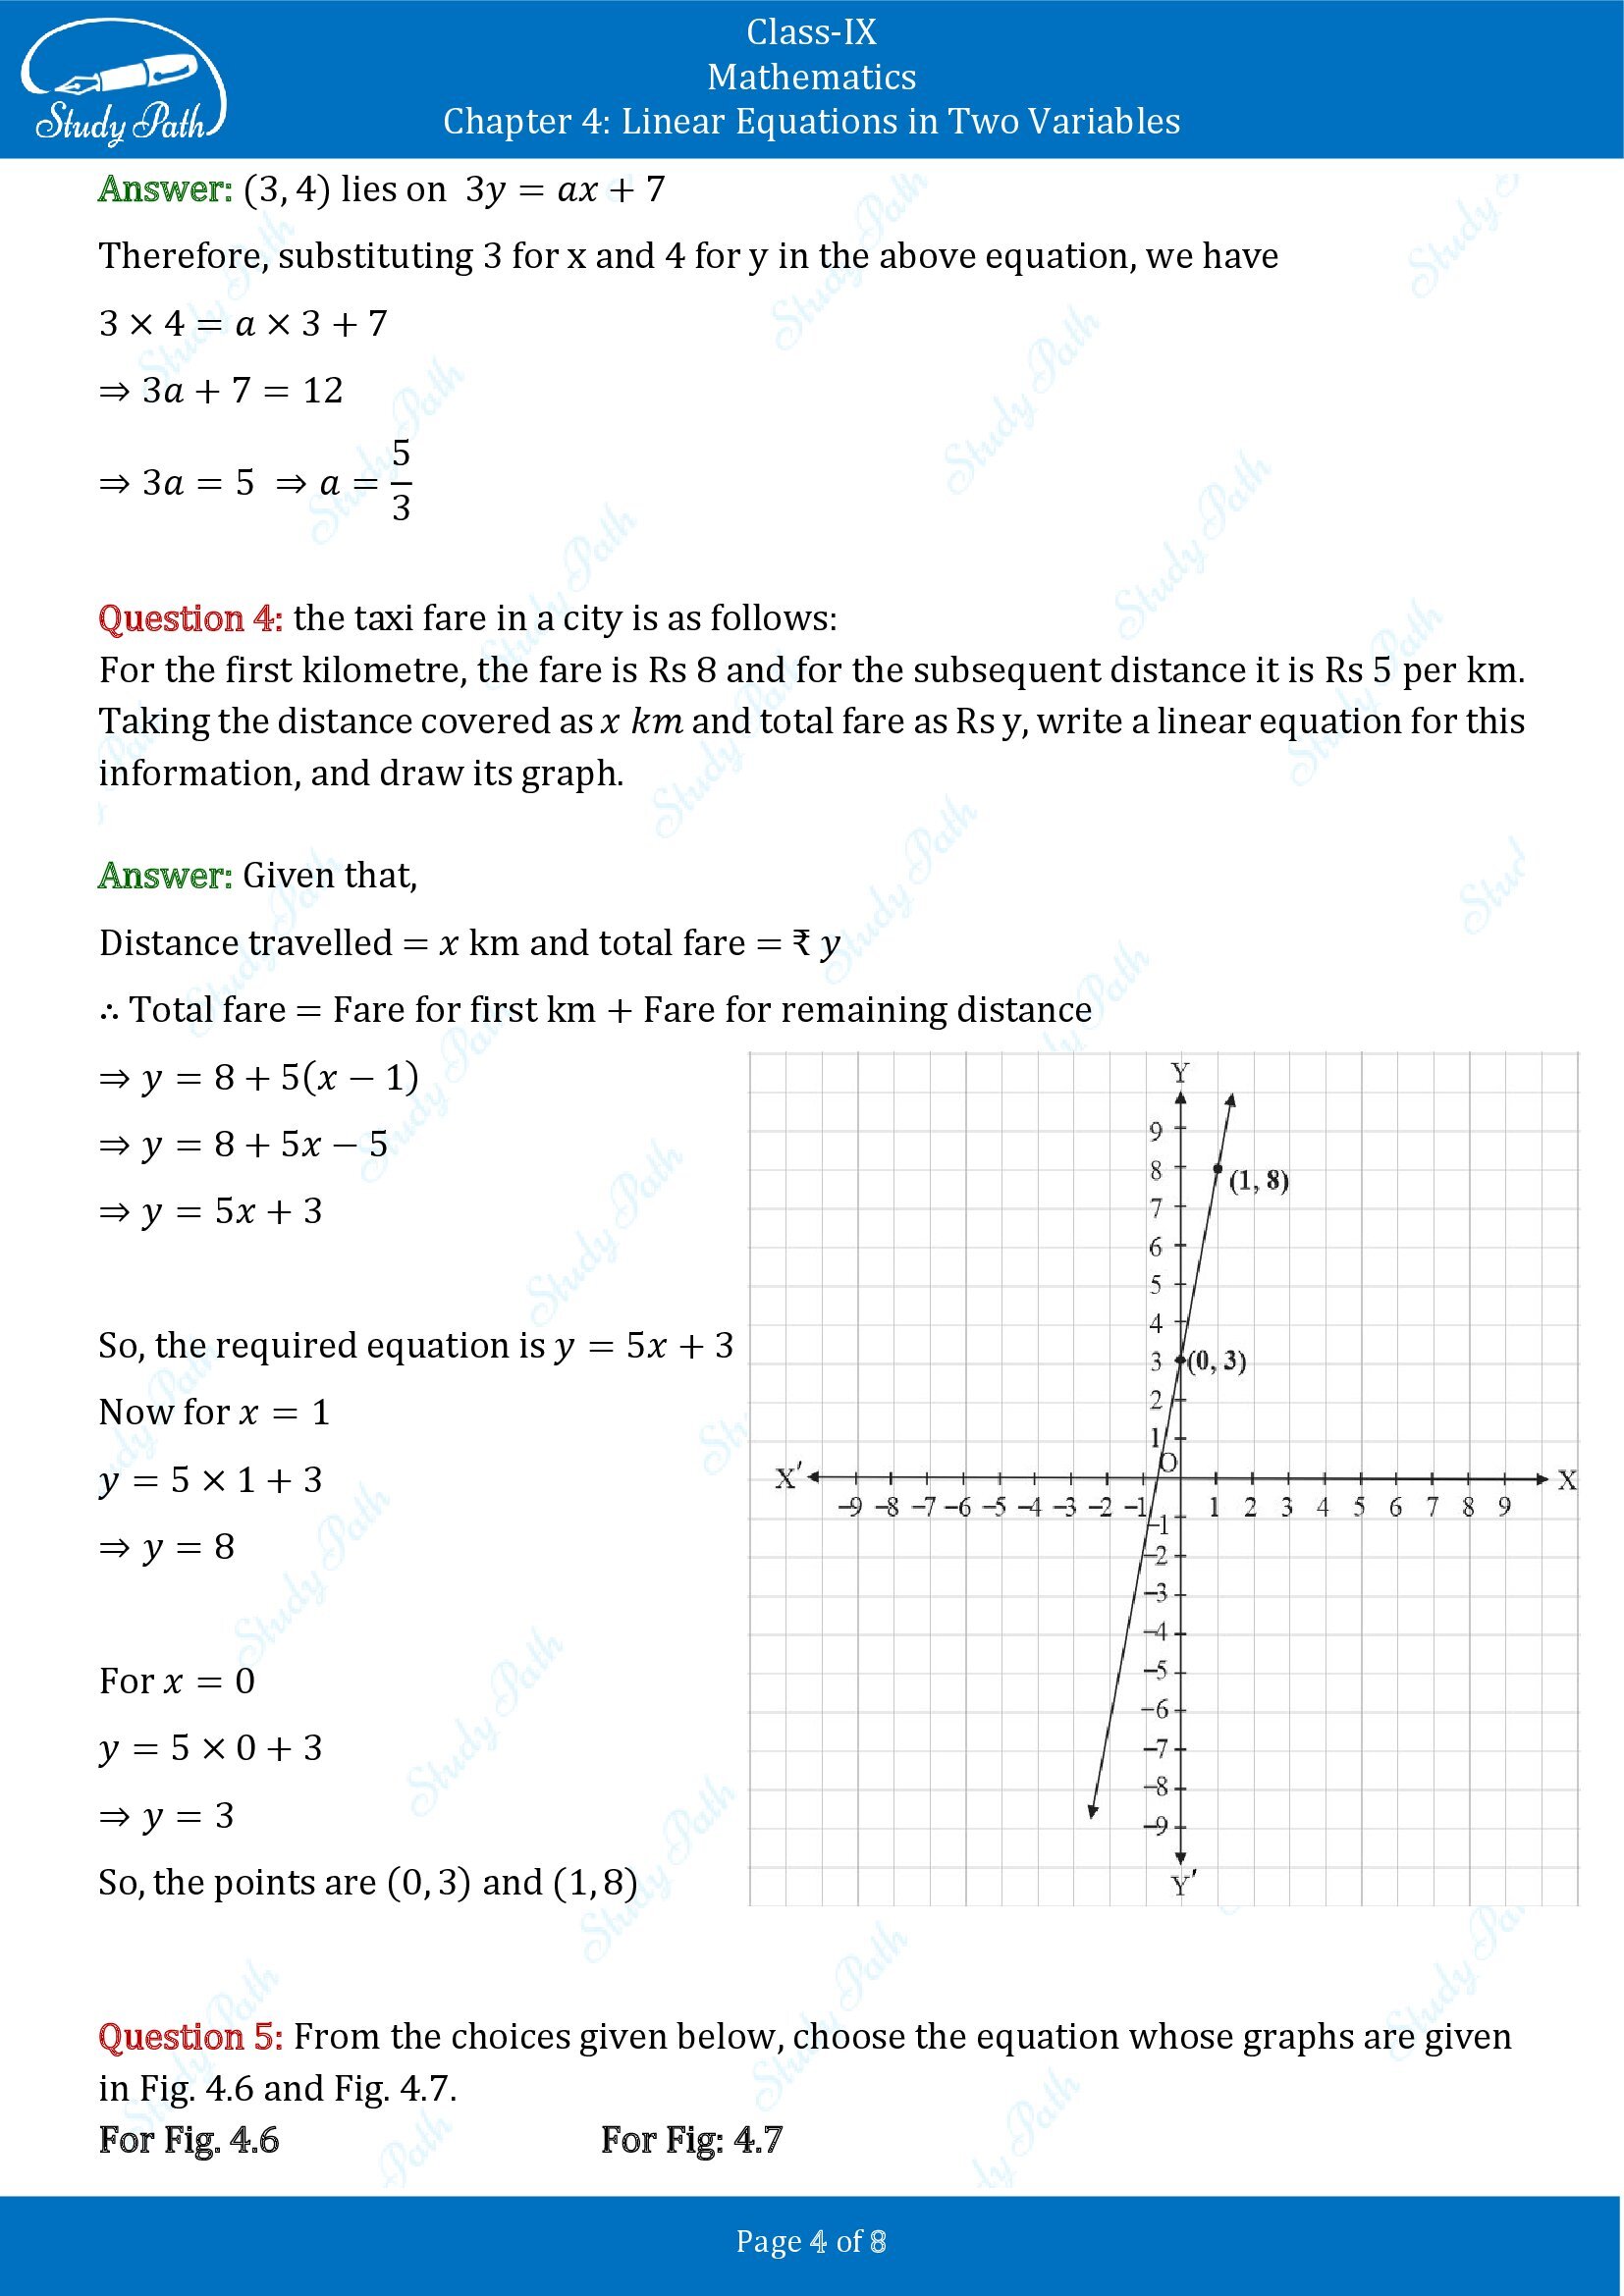 NCERT Solutions for Class 9 Maths Chapter 4 Linear Equations in Two Variables Exercise 4.3 00004